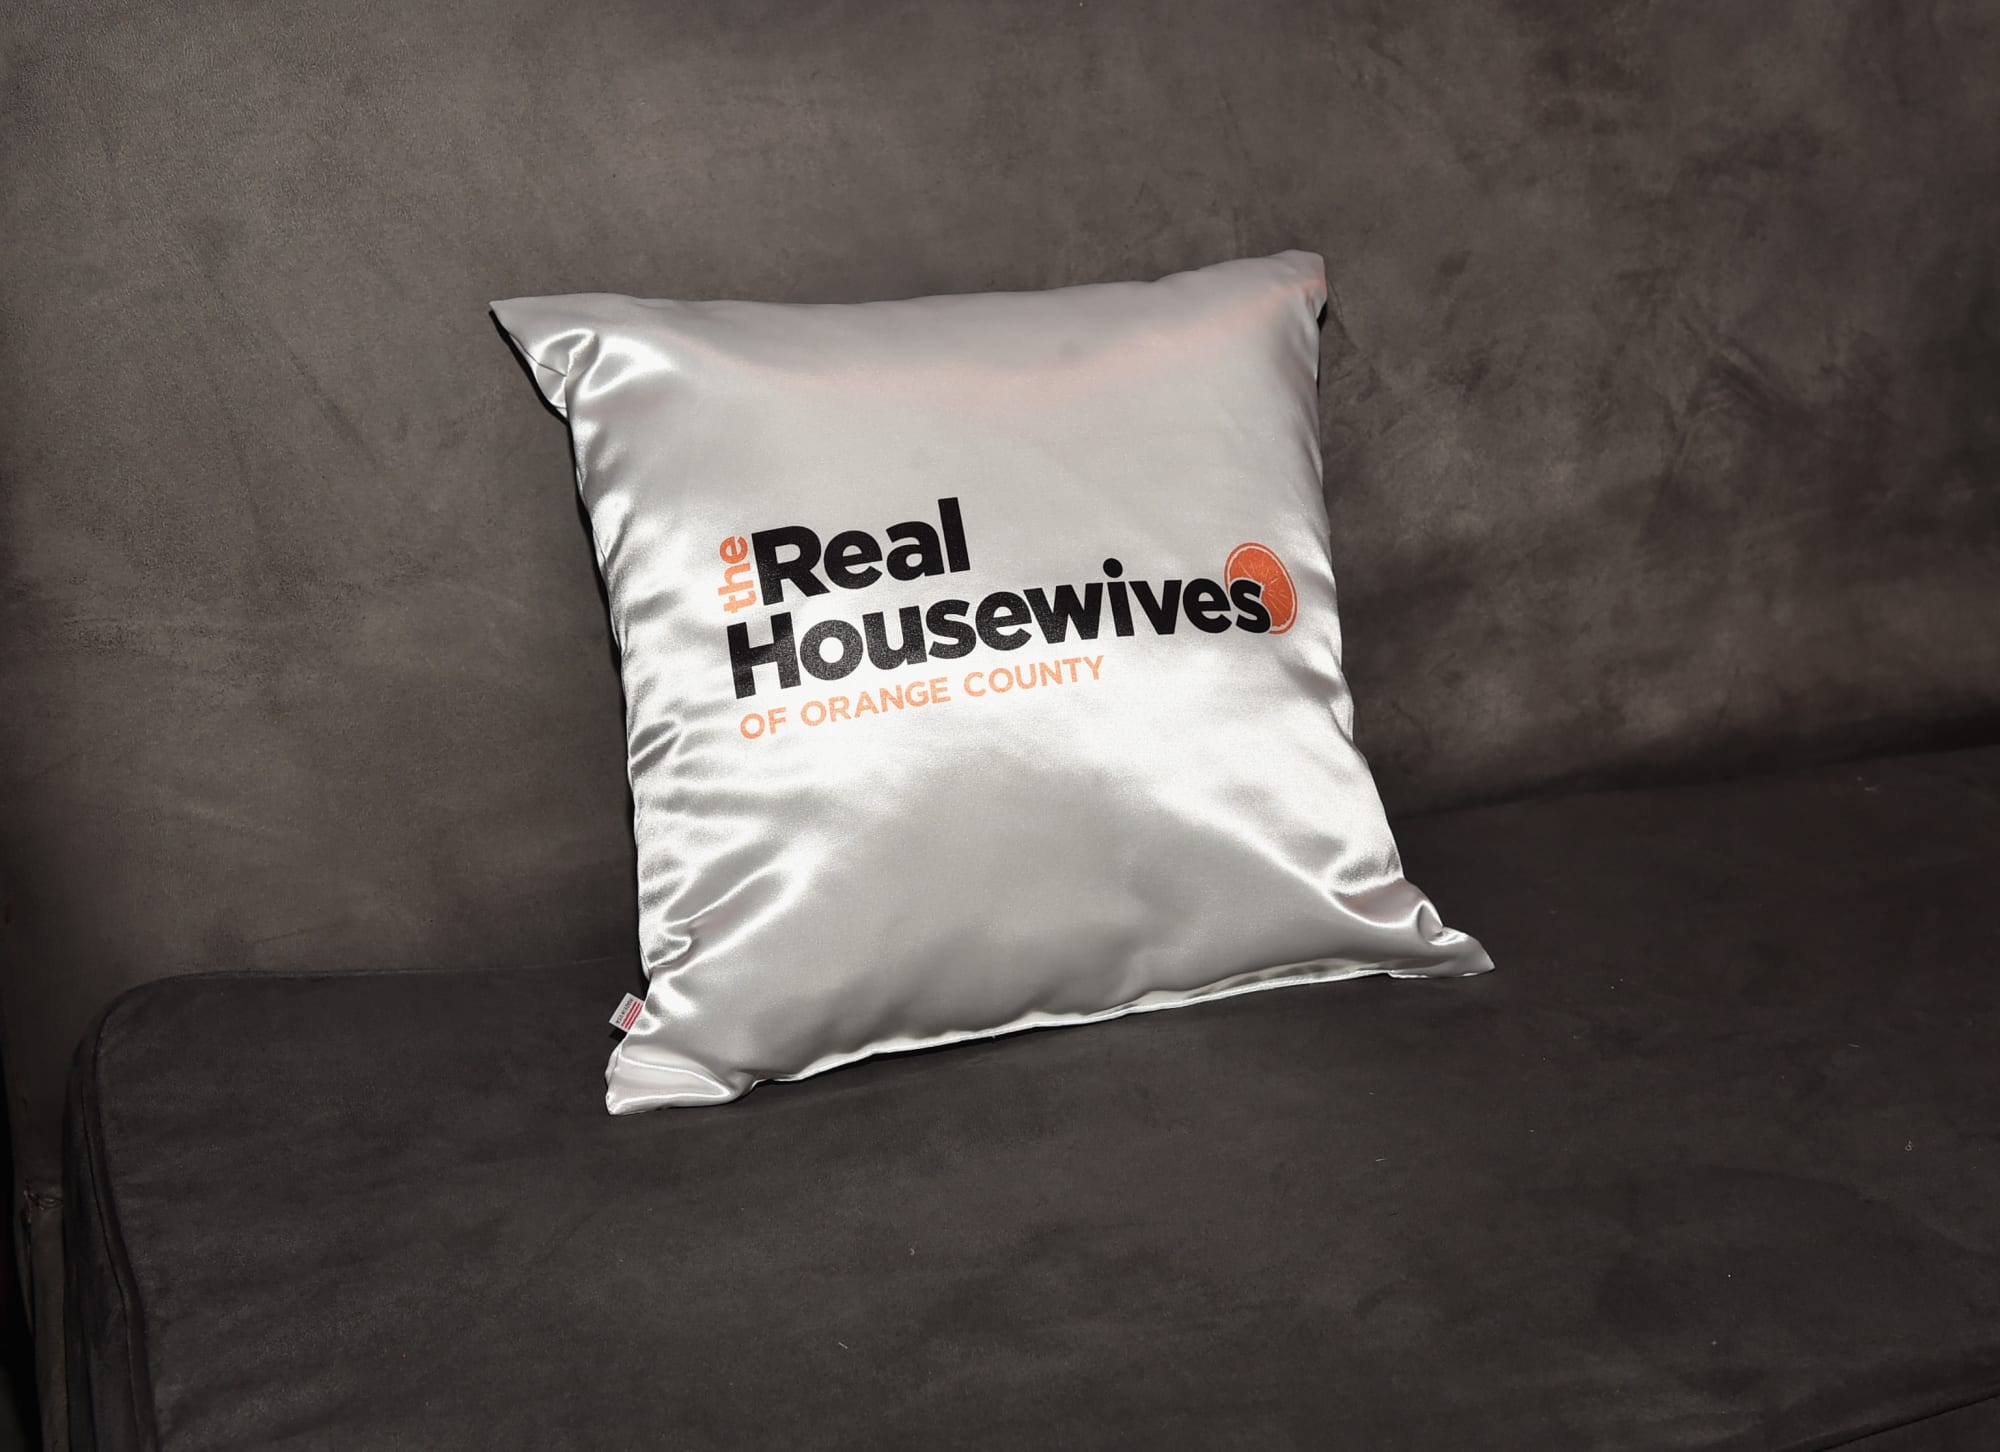 How to watch Real Housewives online for free